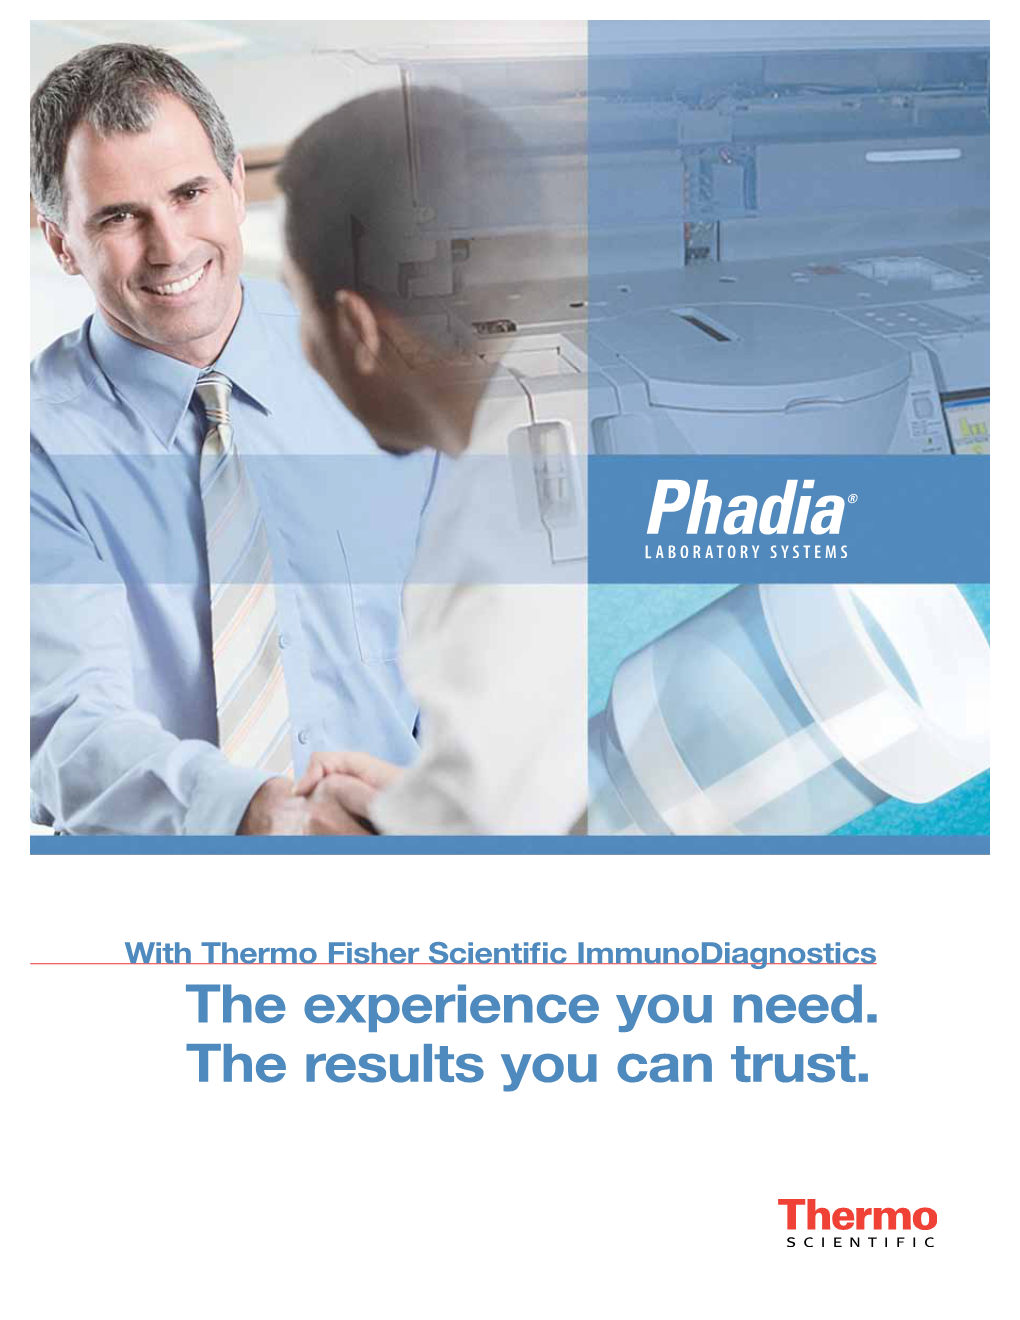 The Experience You Need. the Results You Can Trust